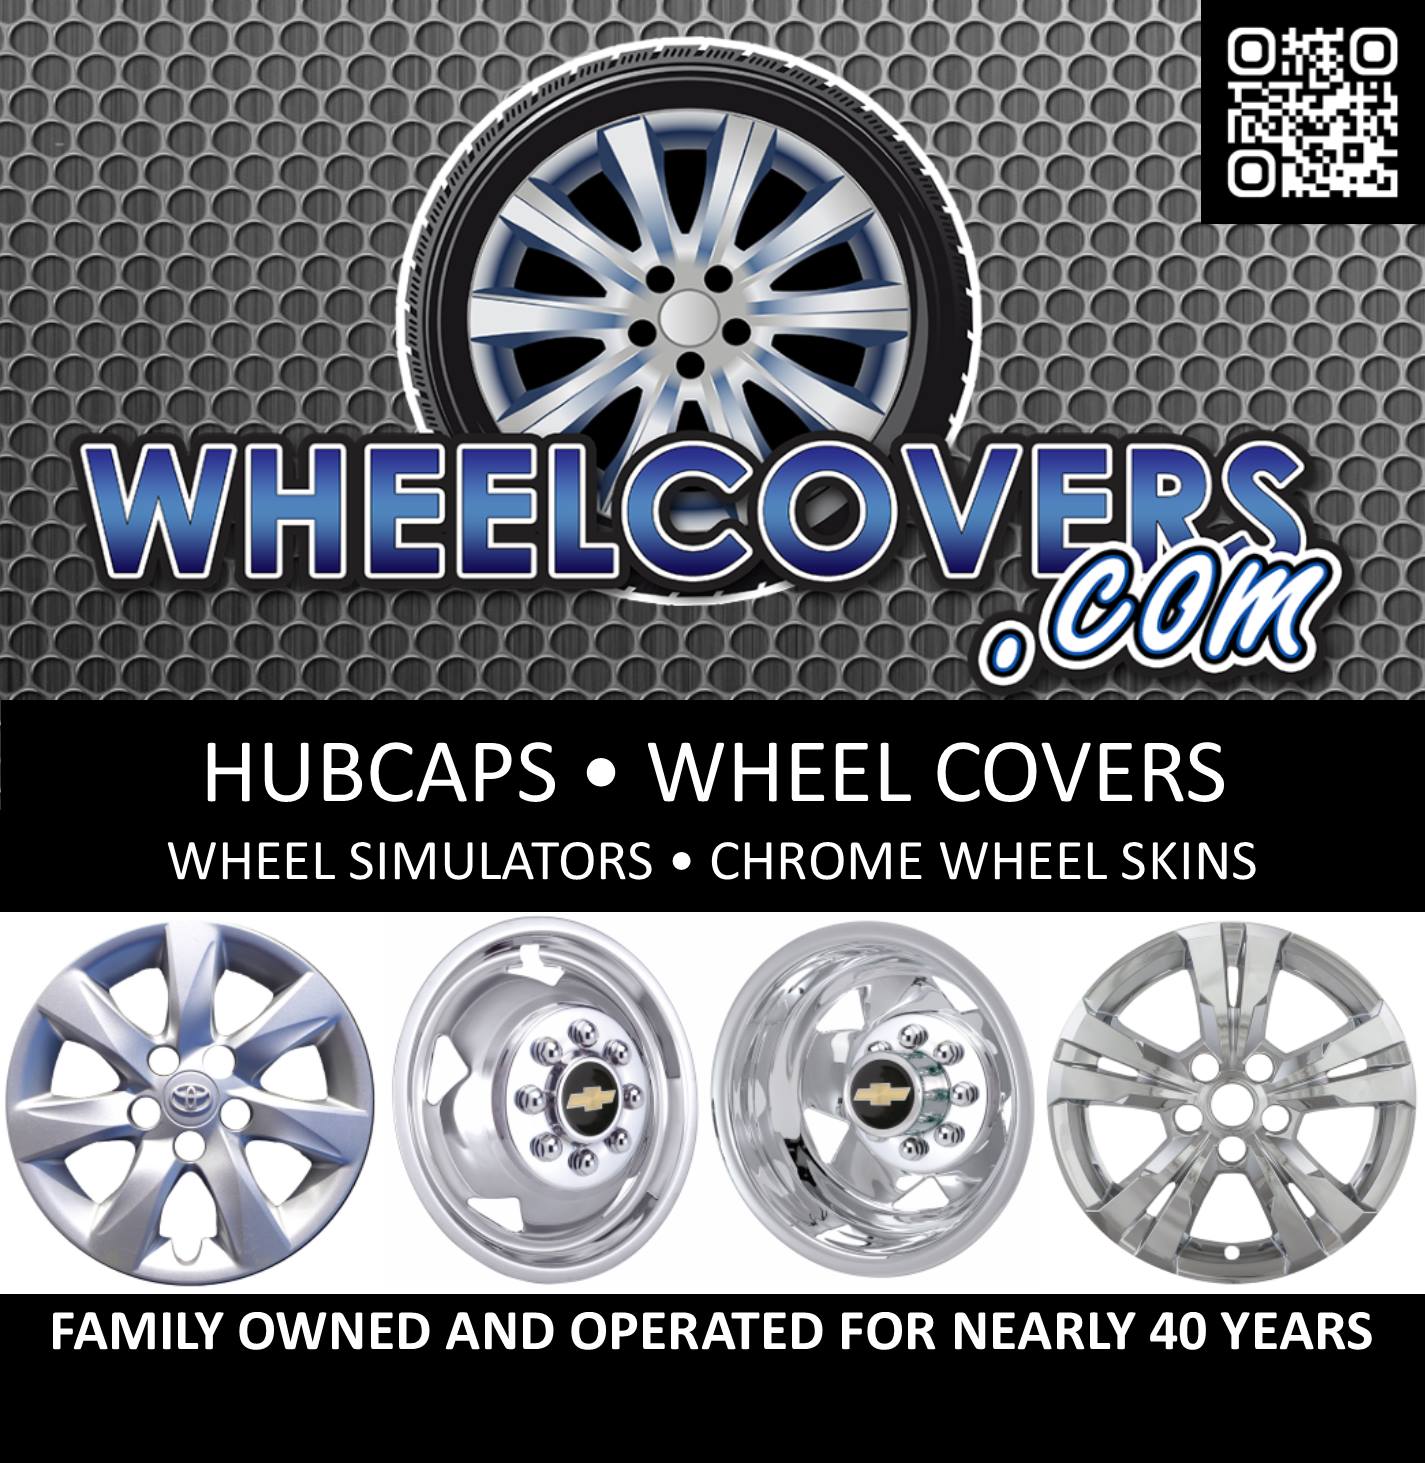 WheelCovers.Com: The Trusted Partner for Hubcaps in the Automotive Industry